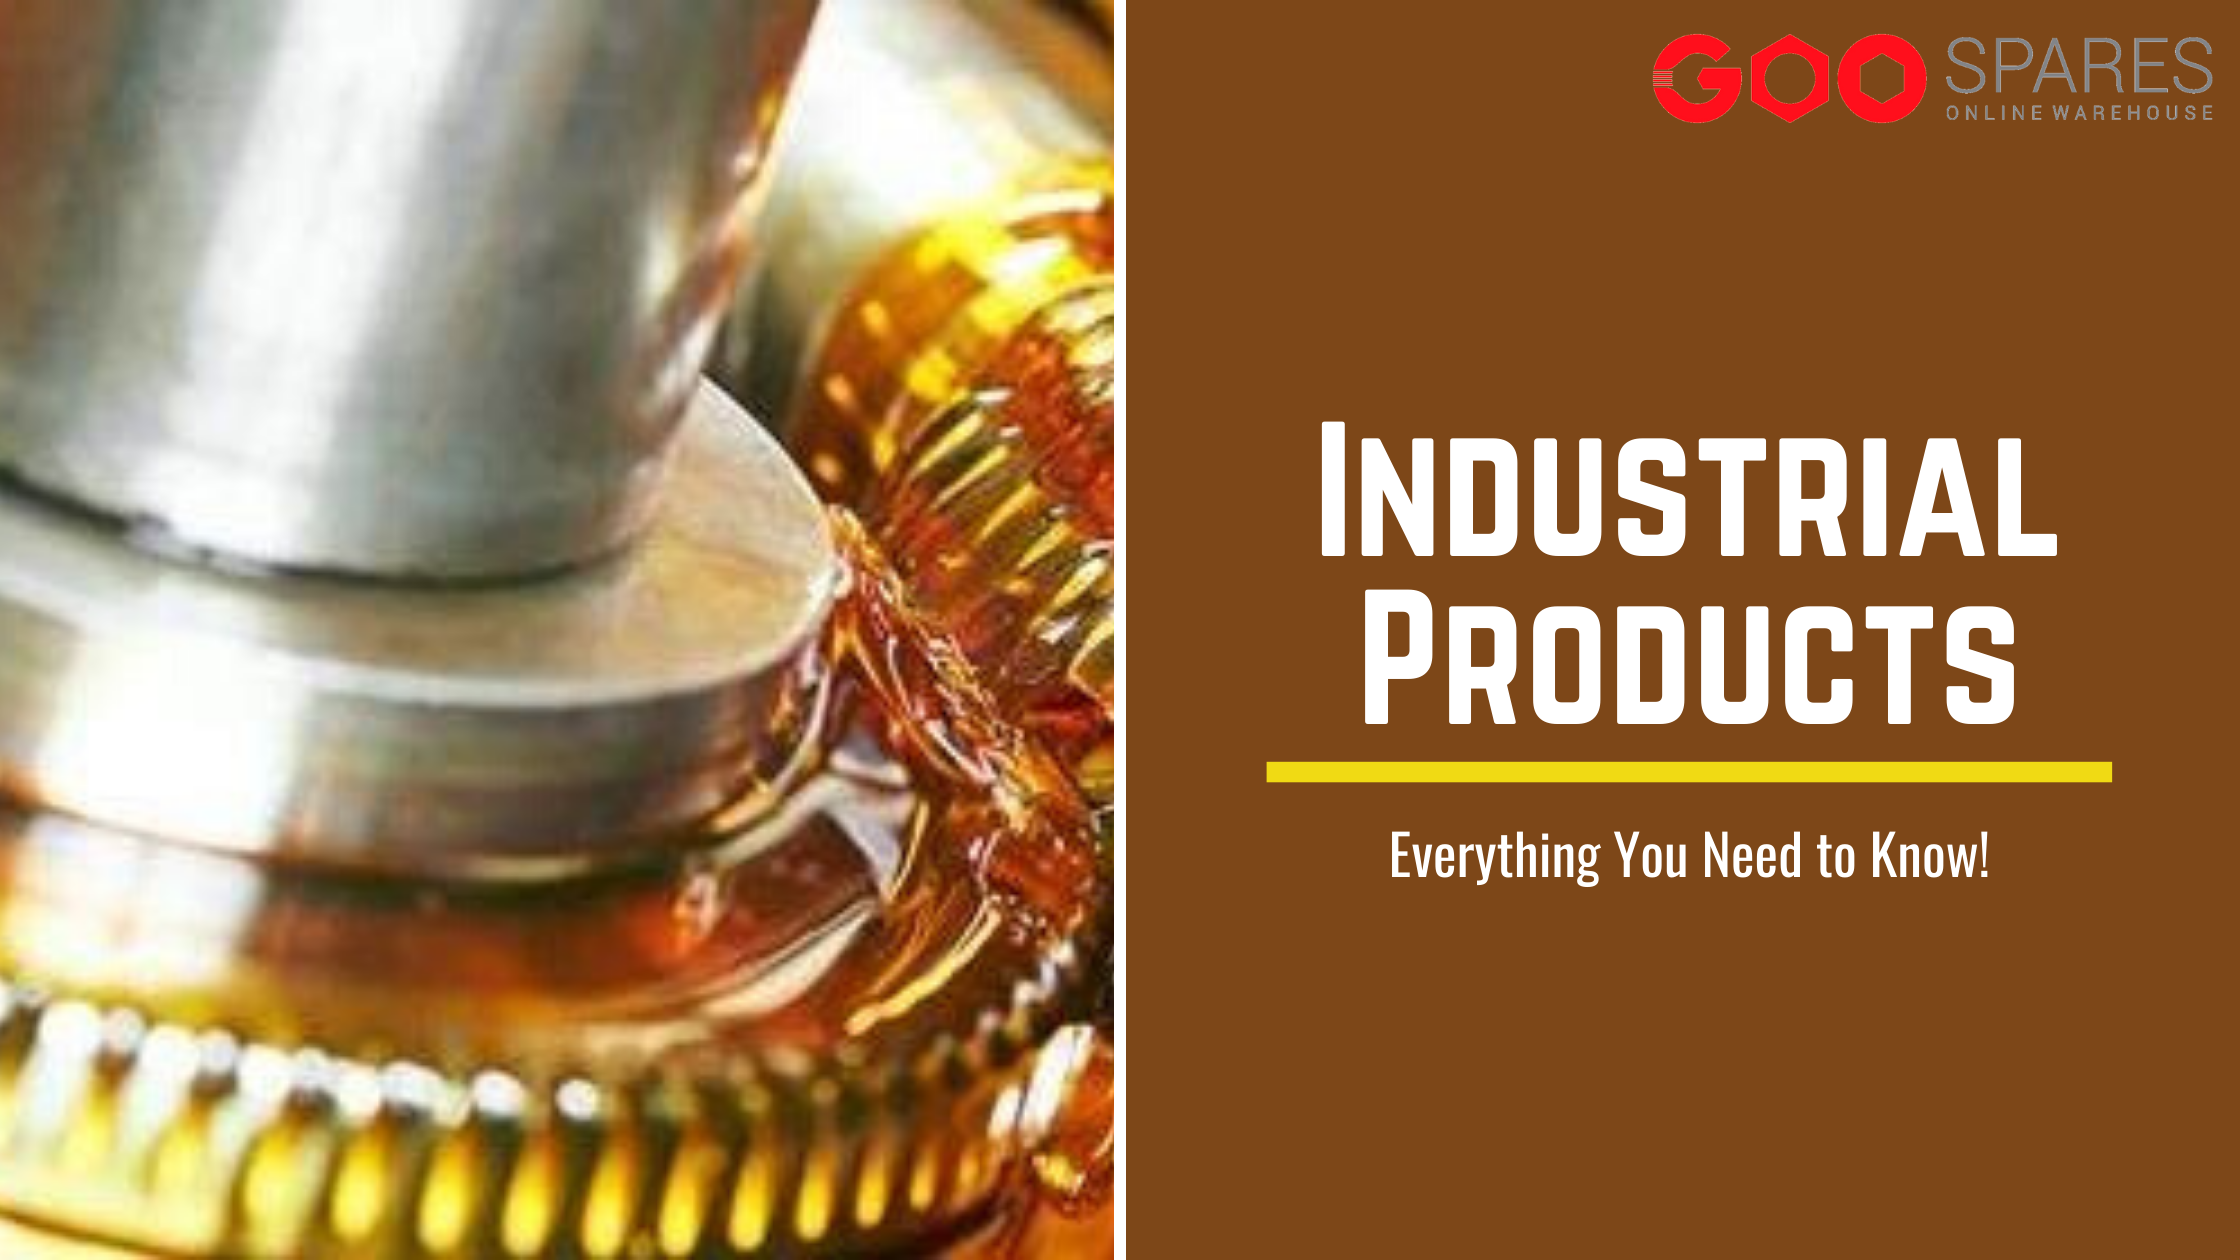 Everything you need to know about the industrial products